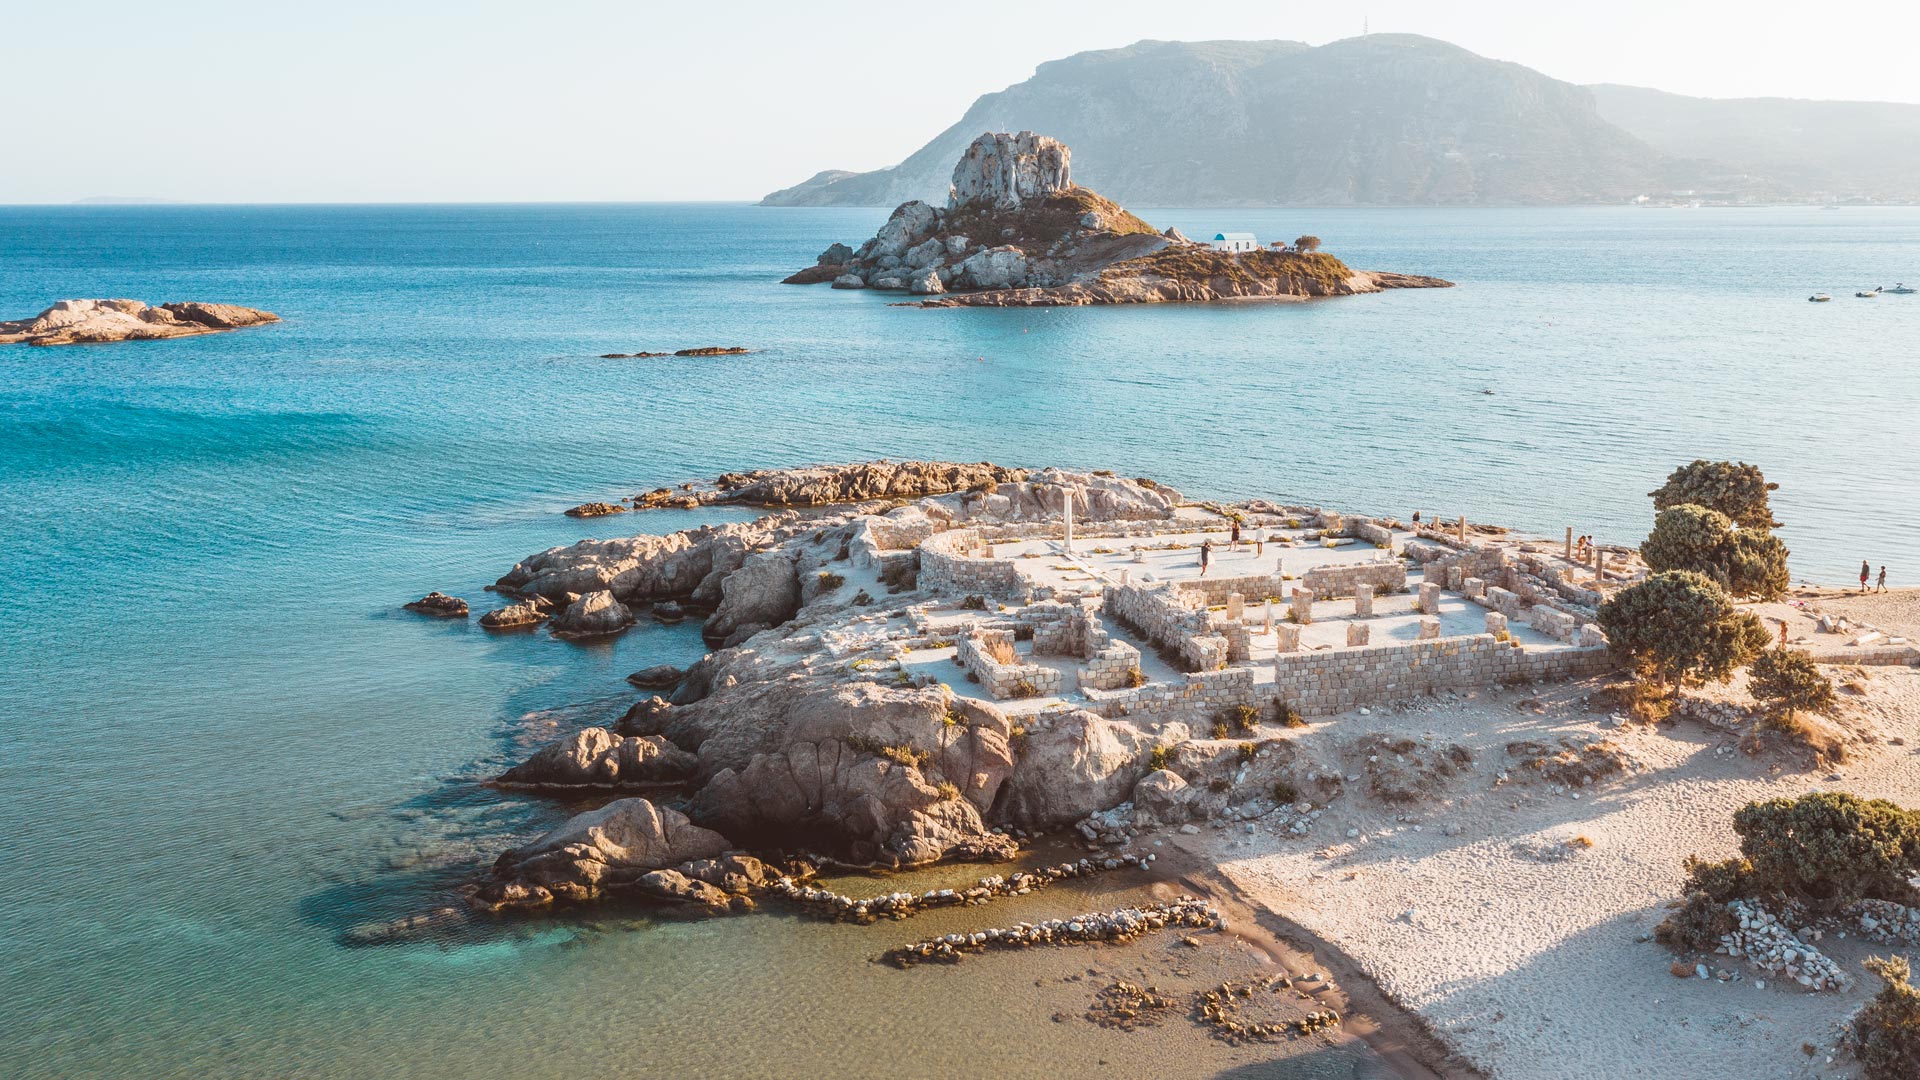 It’s not just the natural beauty of Agios Stefanos beach, but the tiny rock of an island opposite, called Kastri